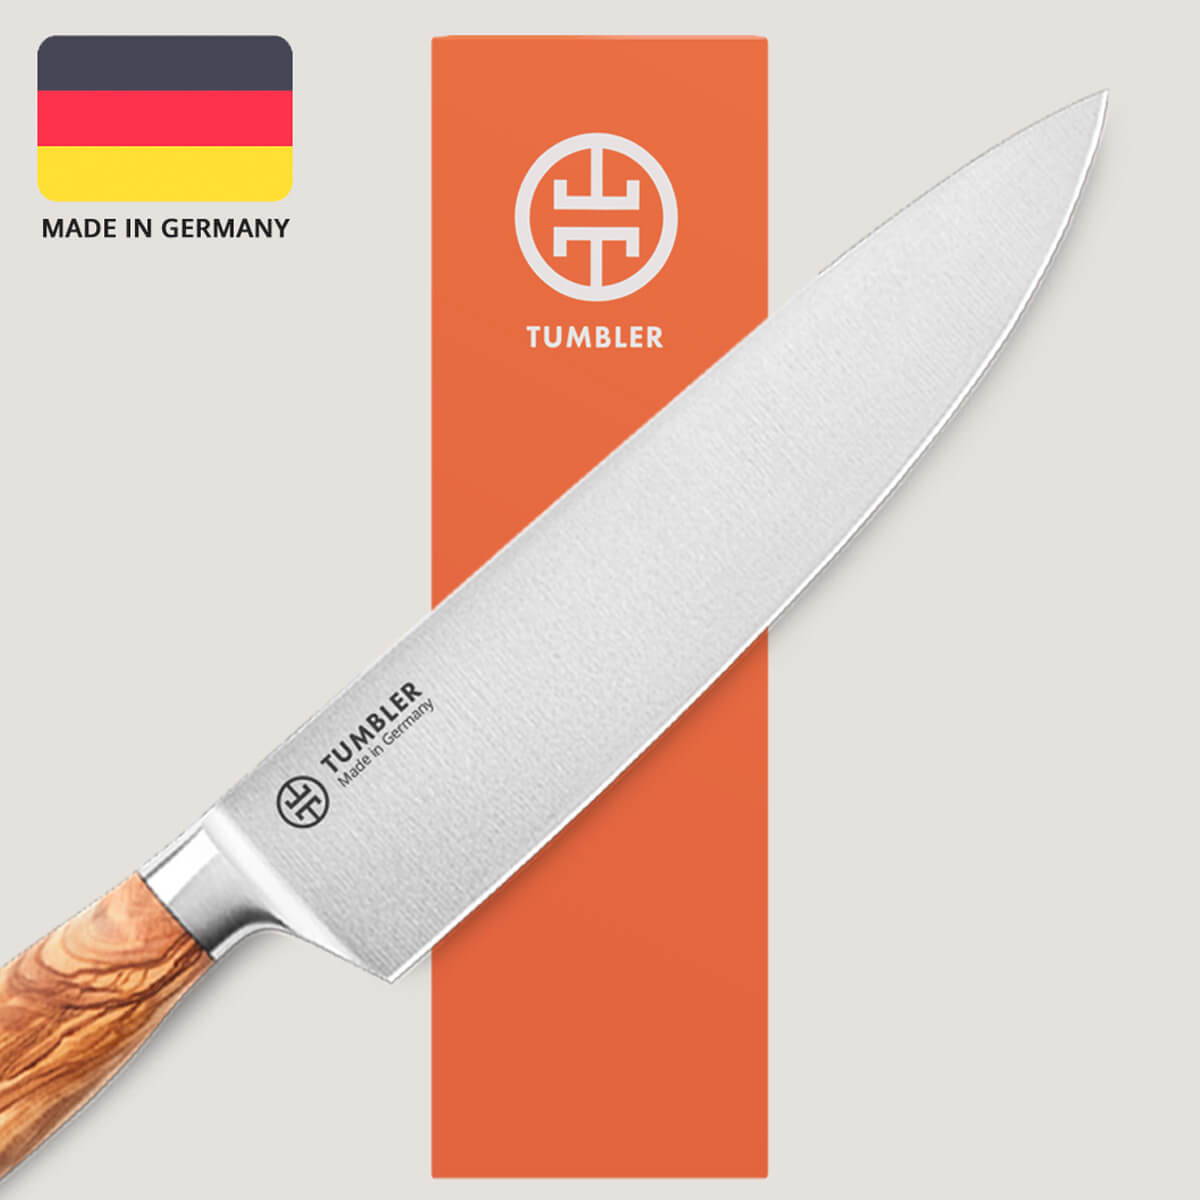 8 Chef's Knife